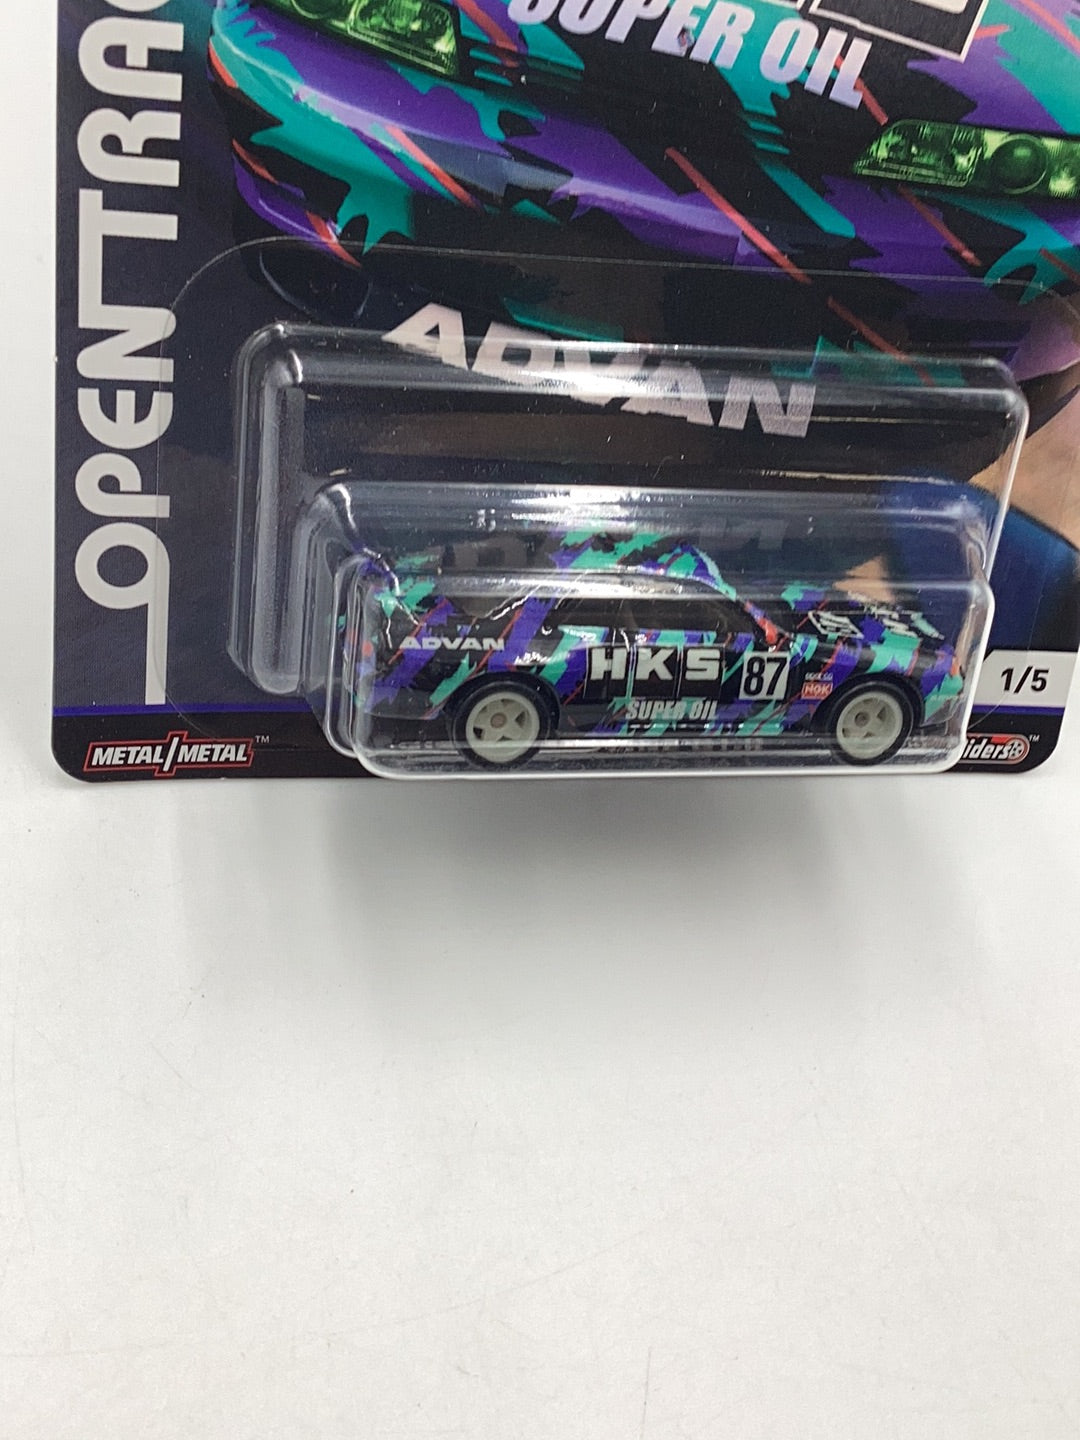 Hot wheels Car Culture Open Track #1 Nissan Skyline GT-R HKS with protector